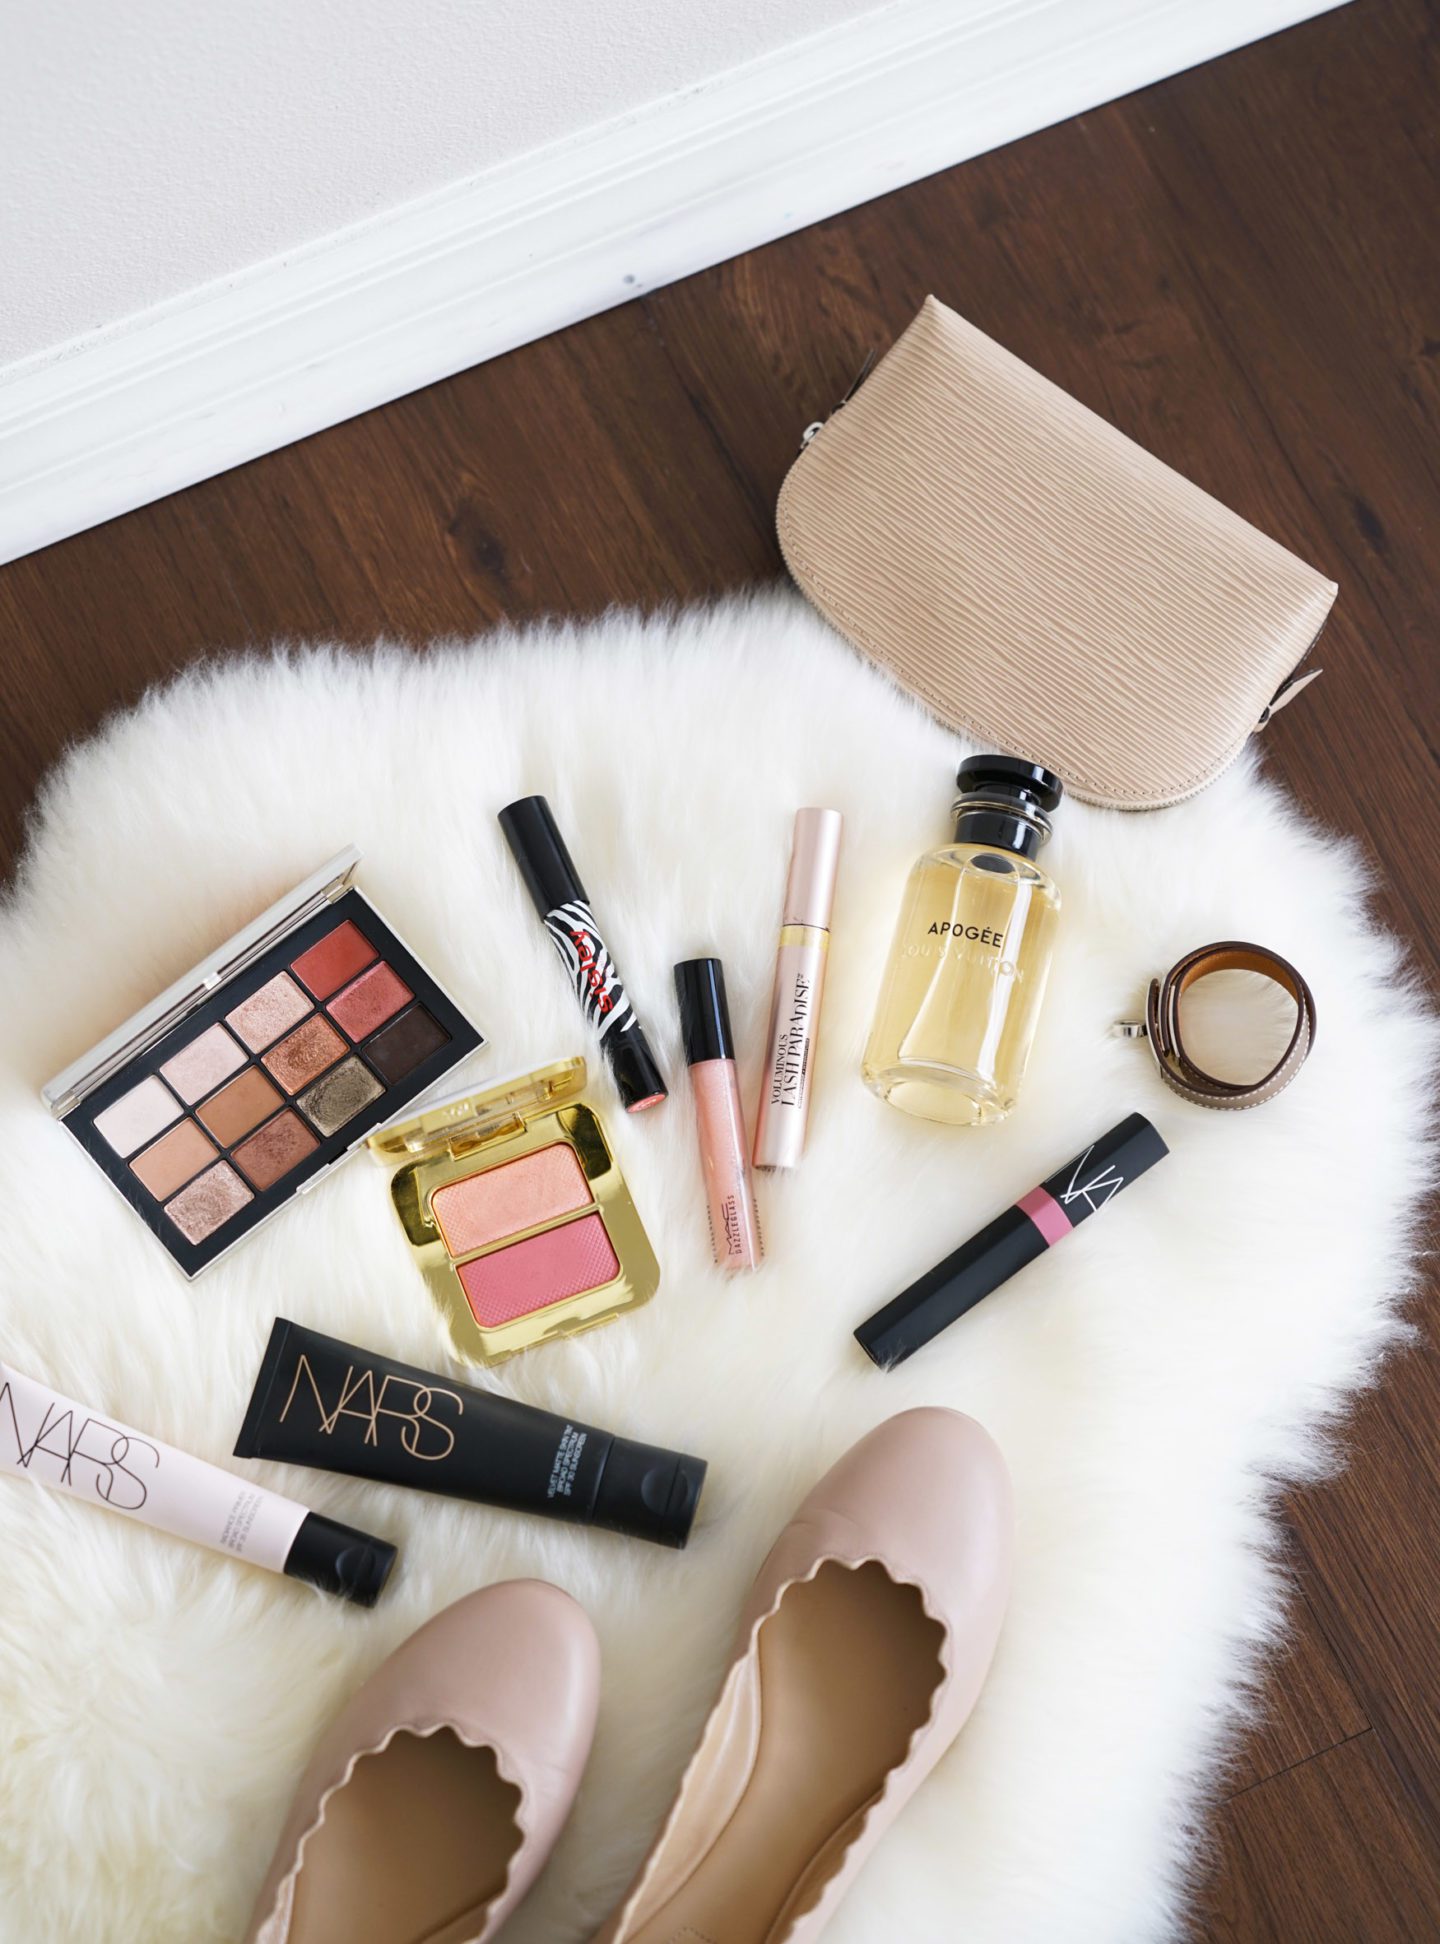 Beauty Look Book Beauty Flatlay | Narsissist Wanted, Louis Vuitton Apogee Perfume, Tom Ford Lavender Lure, NARS Lip Cover Summer Fire